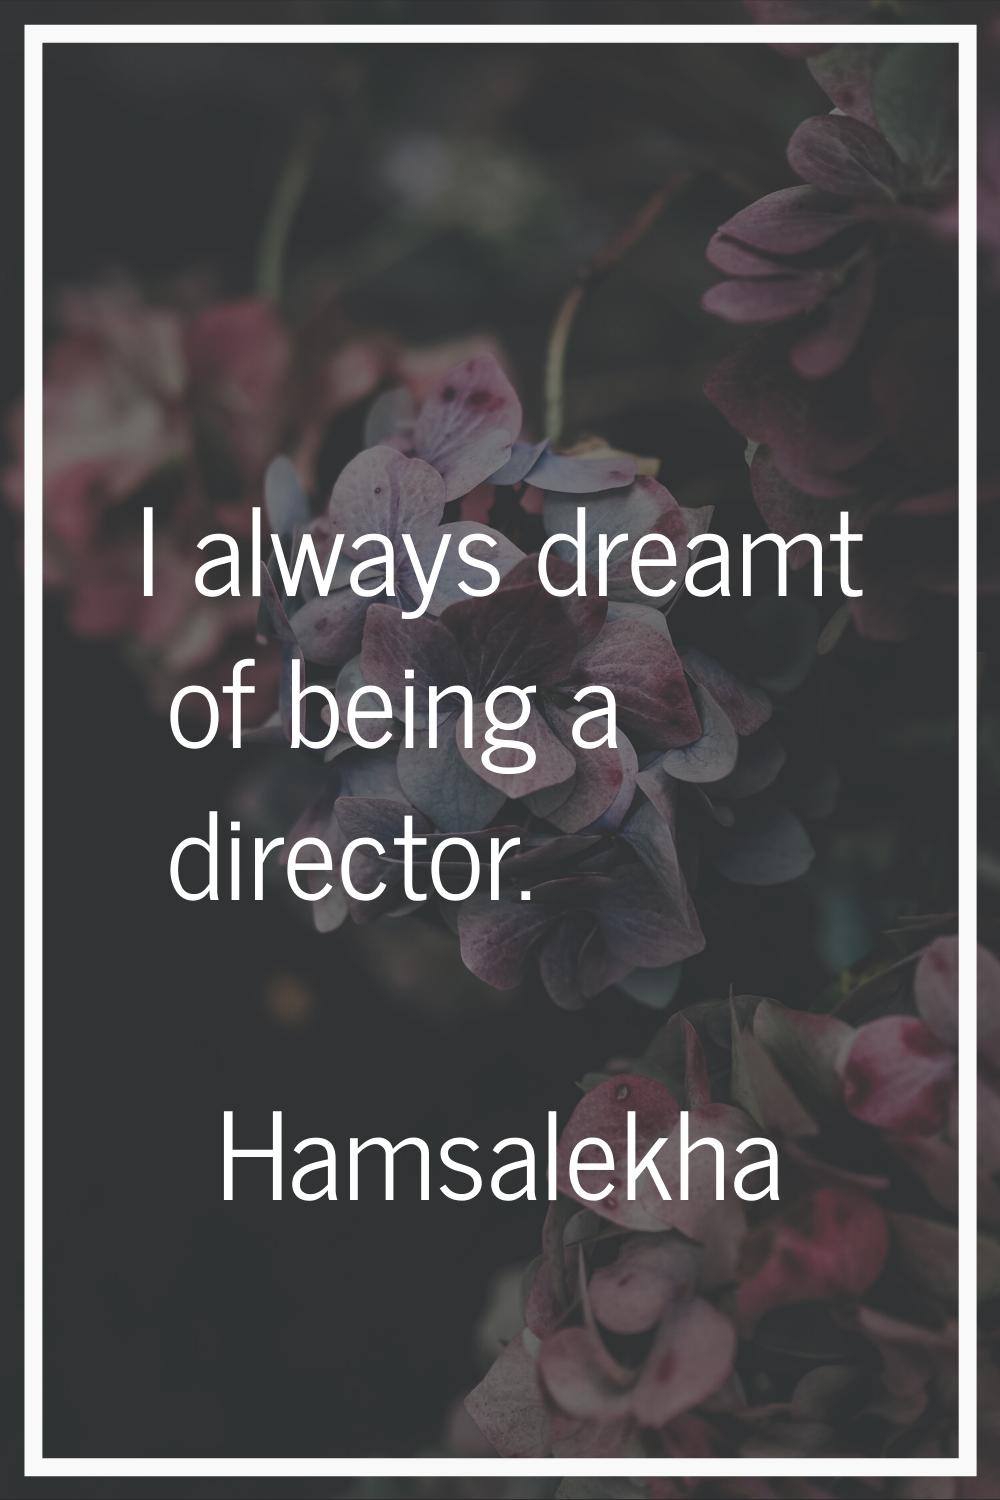 I always dreamt of being a director.